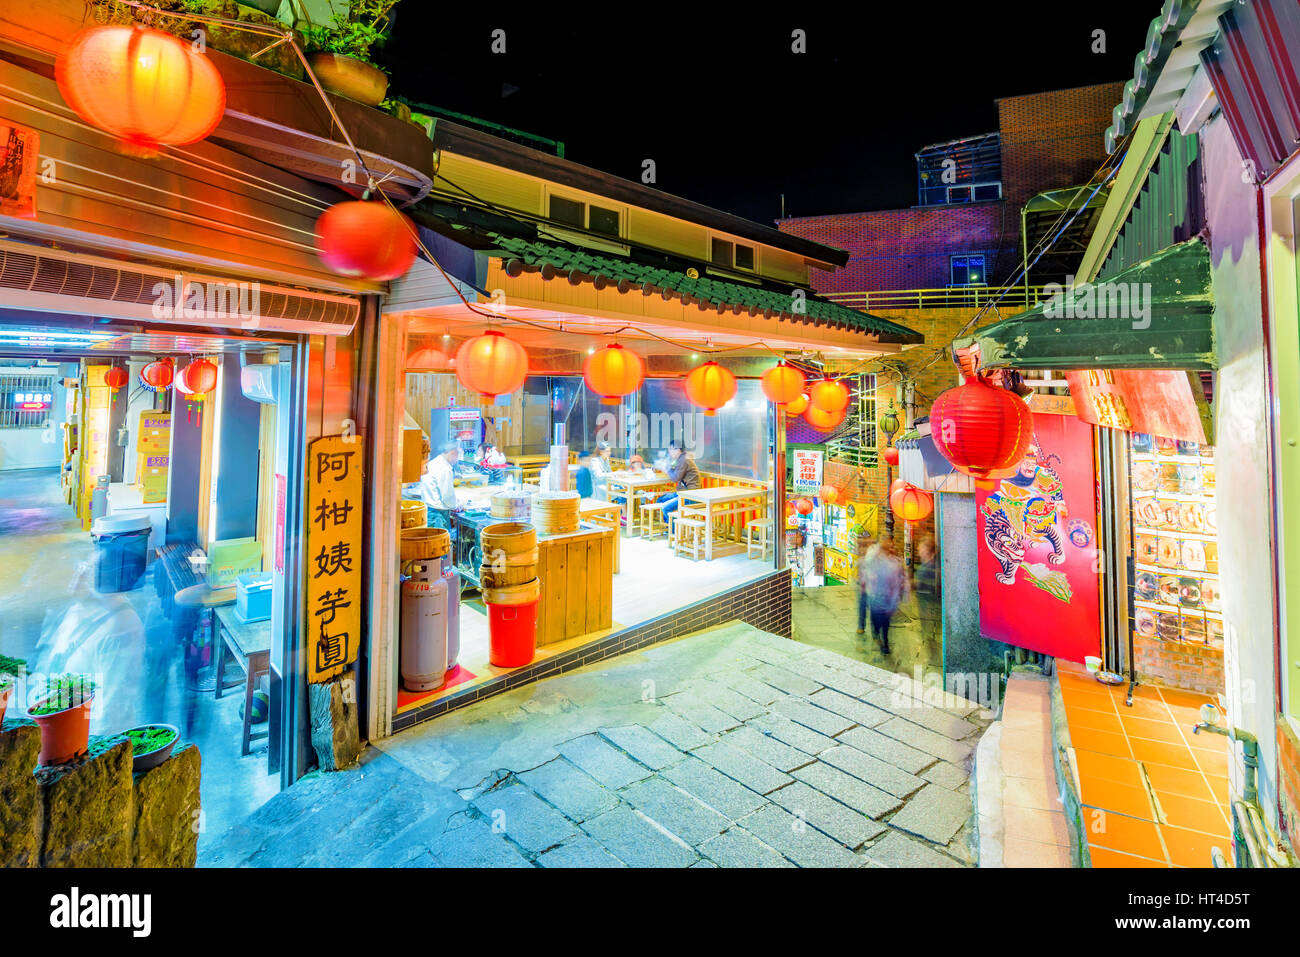 TAIPEI, TAIWAN - DECEMBER 19: This is a side street in Jiufen town at night which has street vendors souvenir shops and restauranrts on December 19, 2 Stock Photo